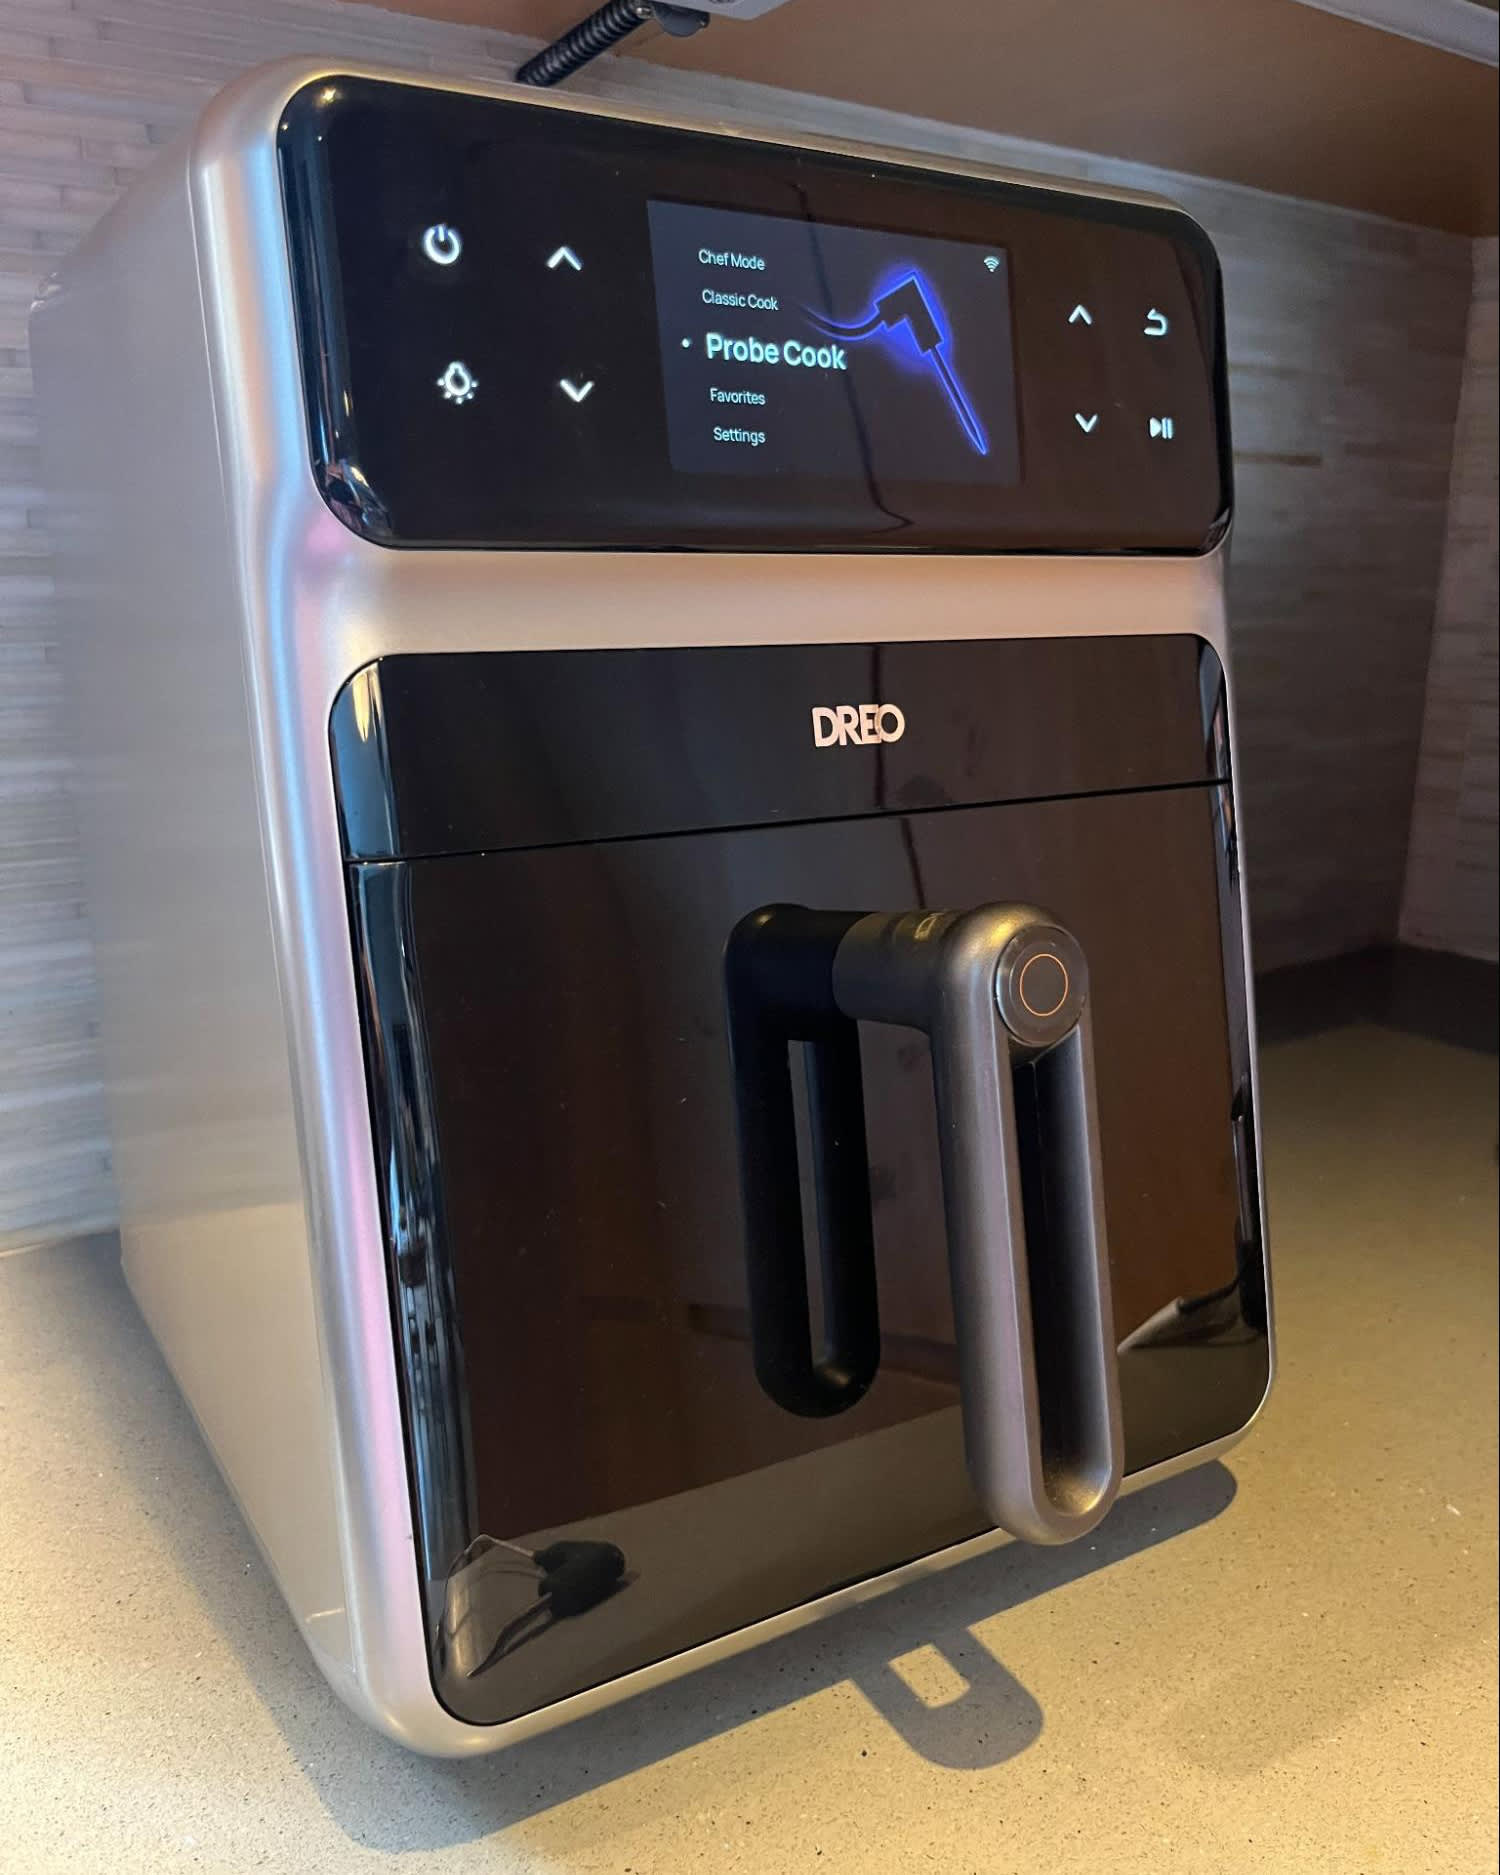 Dreo ChefMaker Combi Fryer turns anyone into a master chef, and